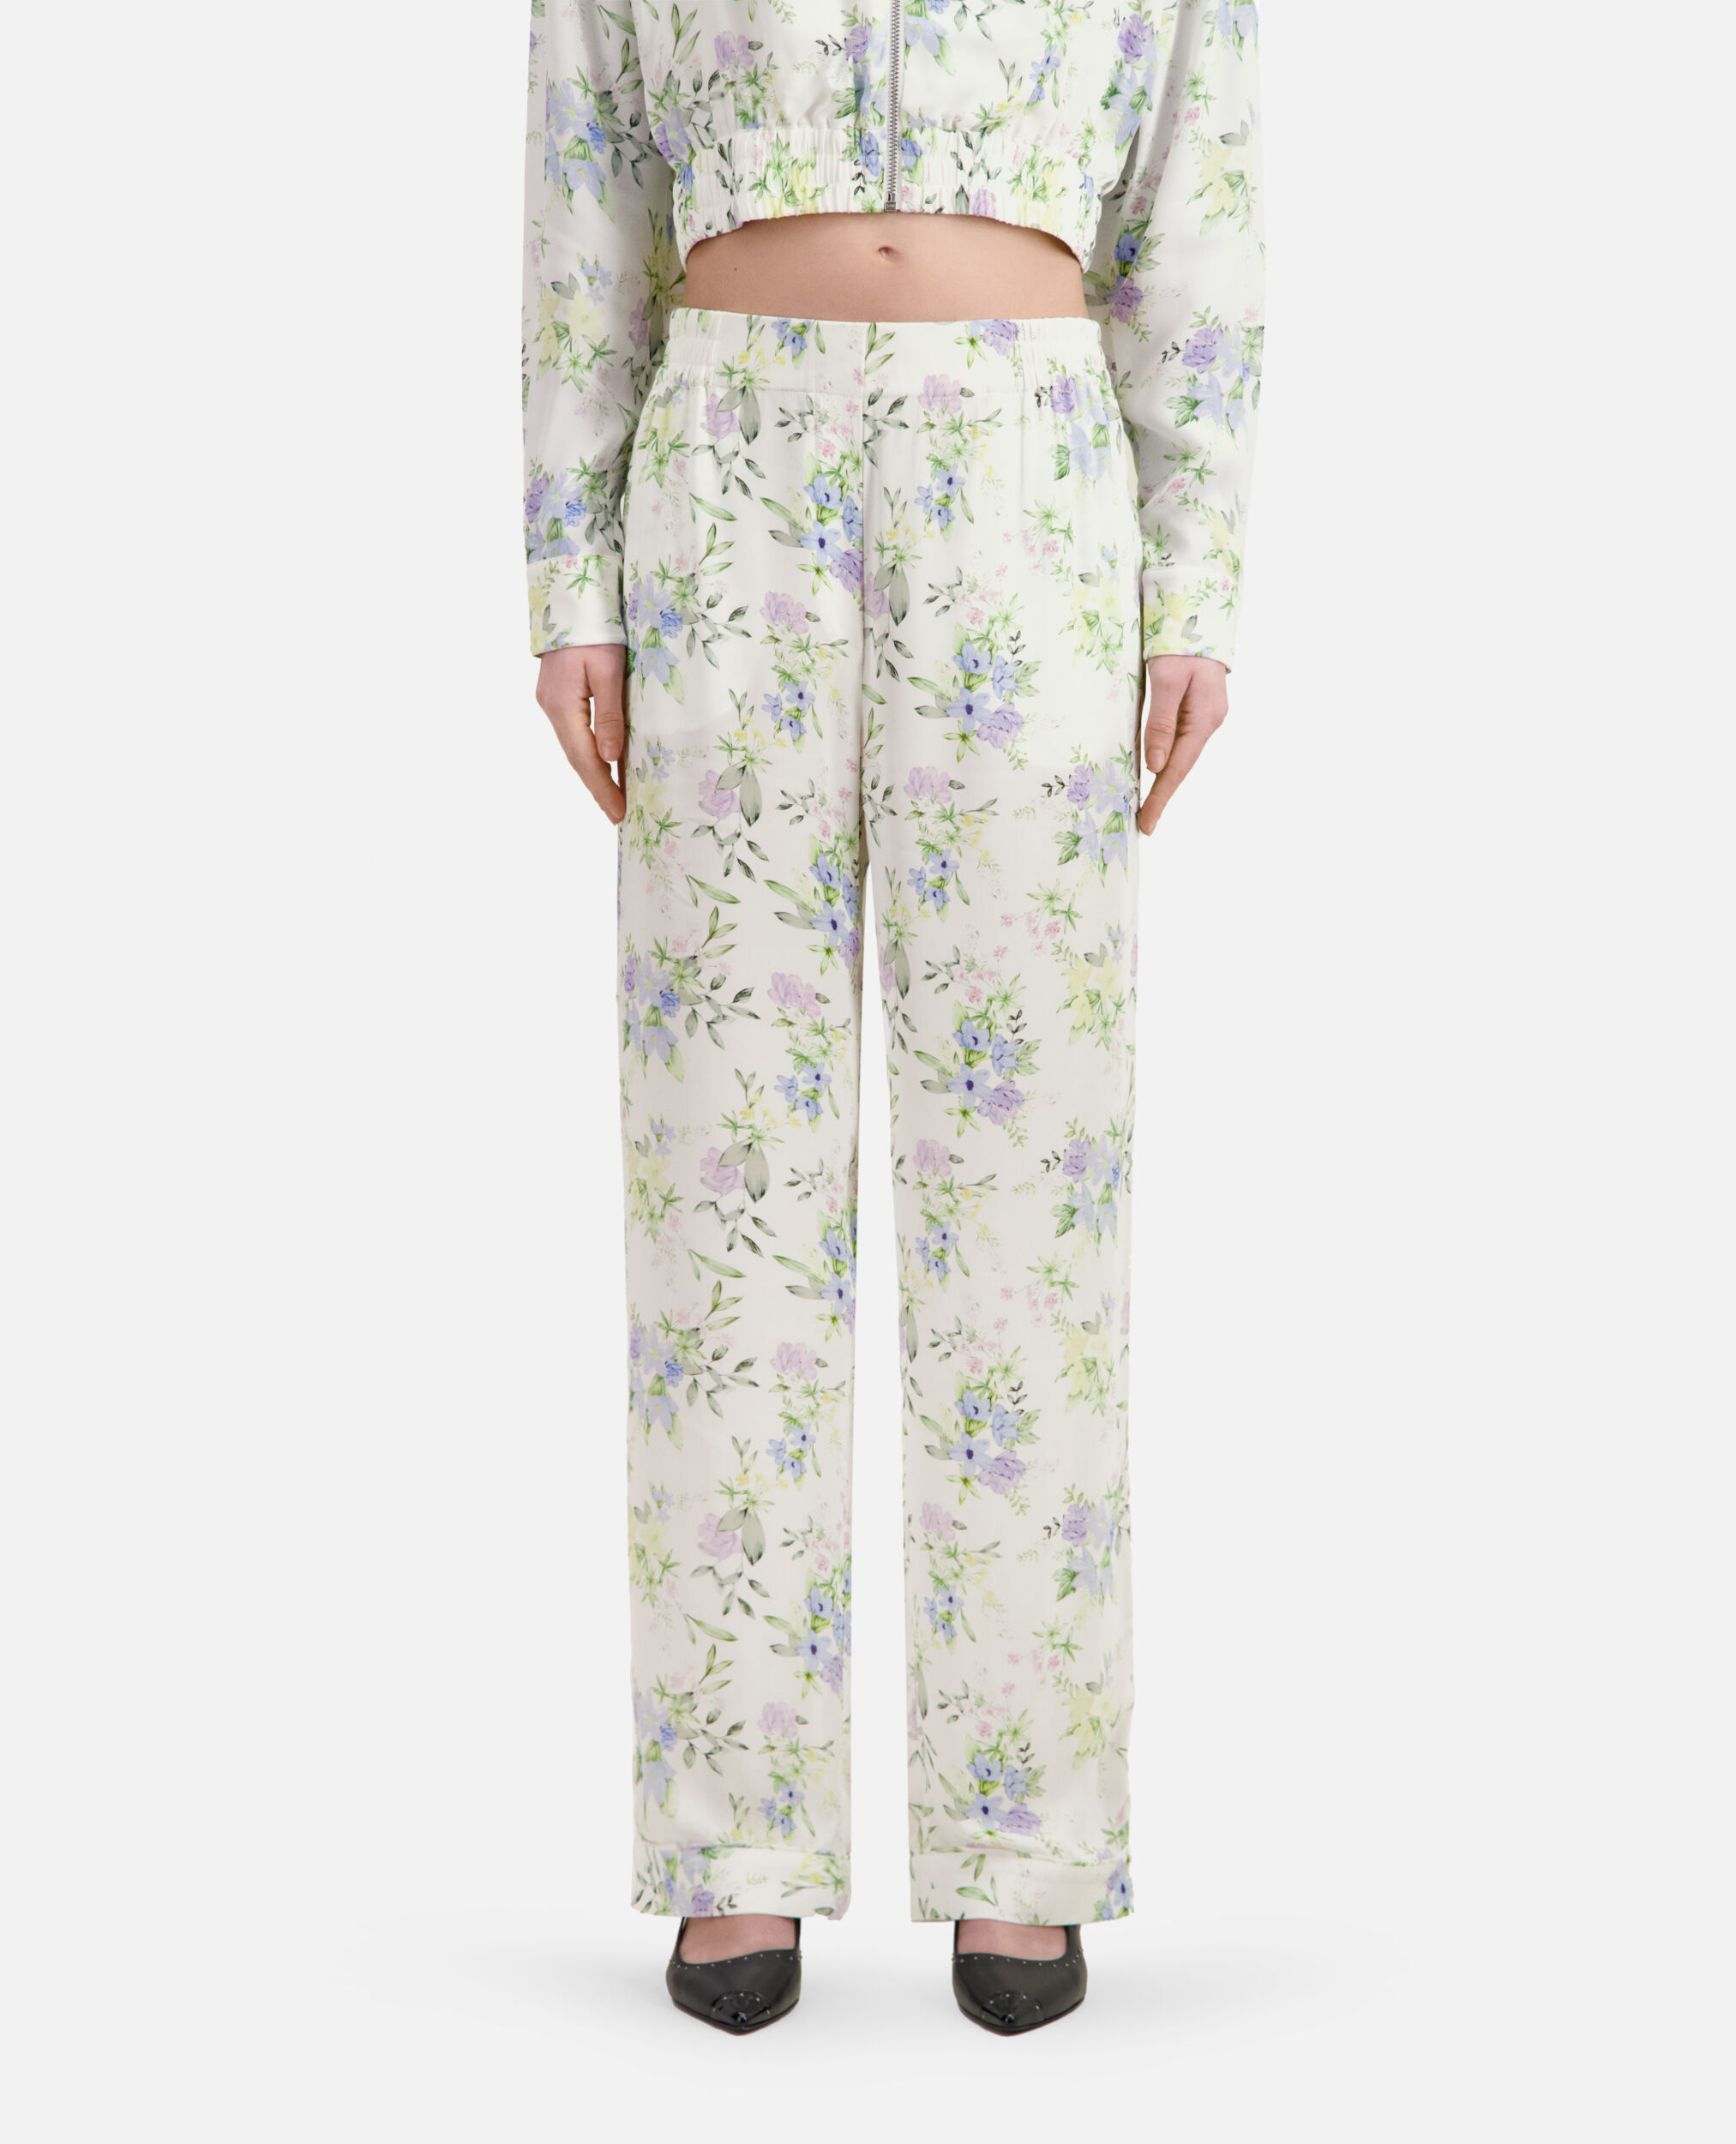 Printed trousers, LIGHT BLUE/WHITE, hi-res image number null